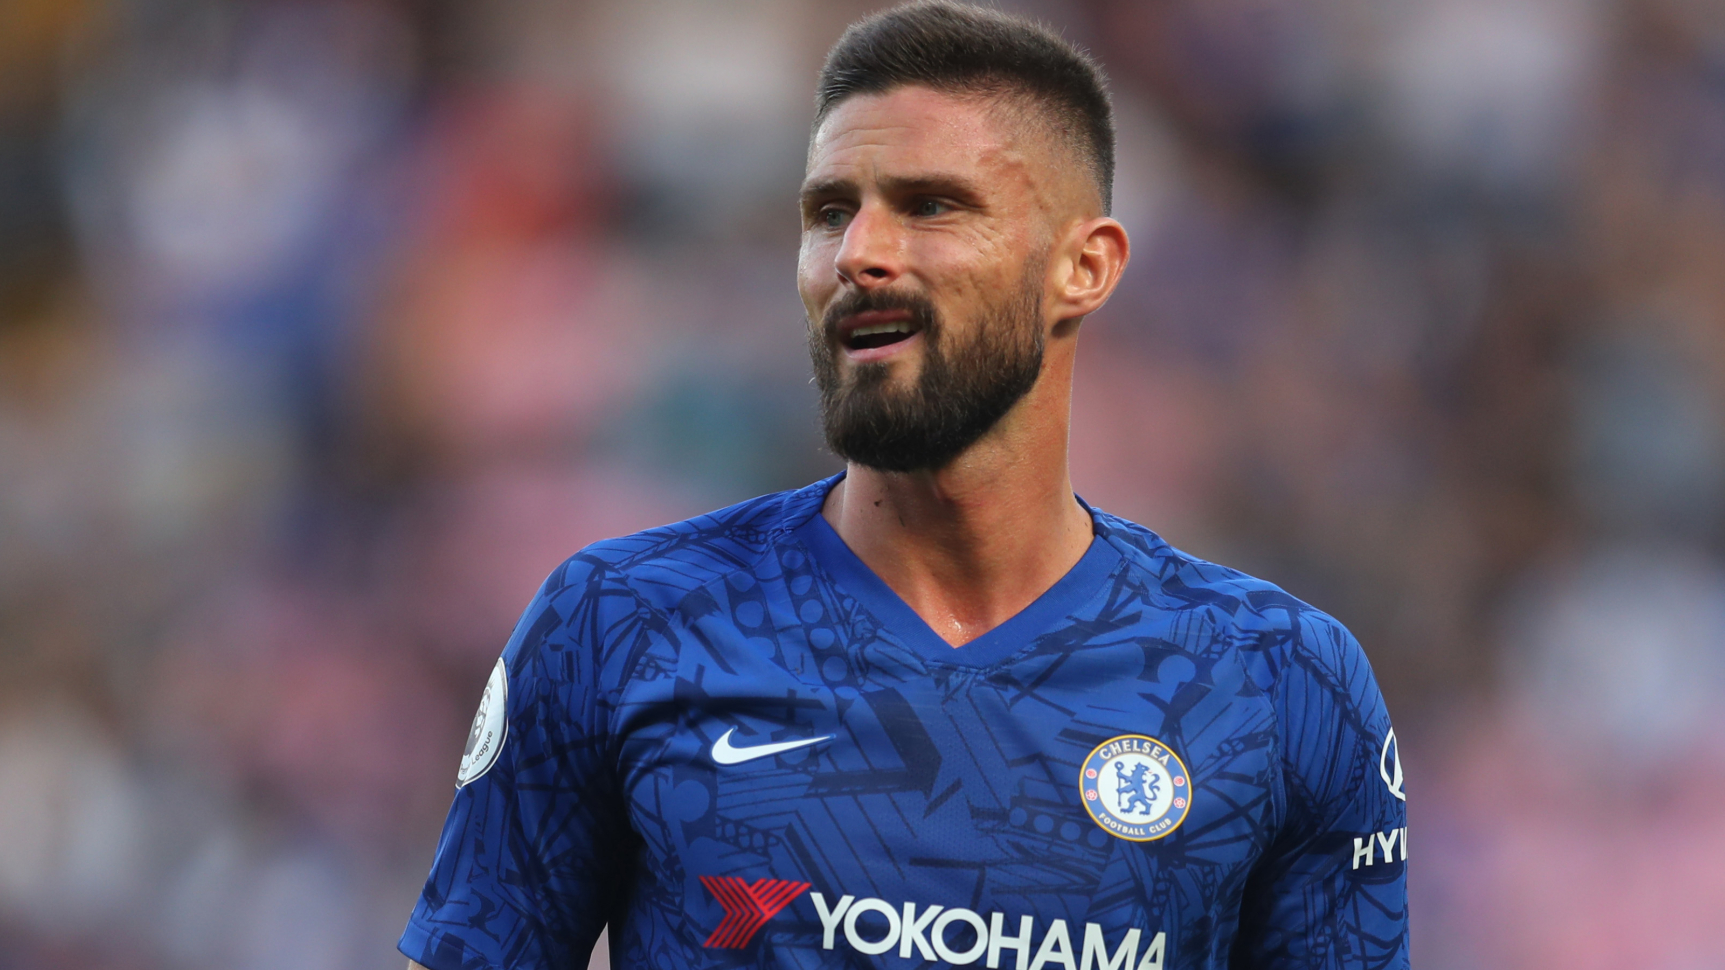 Chelsea striker Giroud unhappy at fringe role but won't criticise